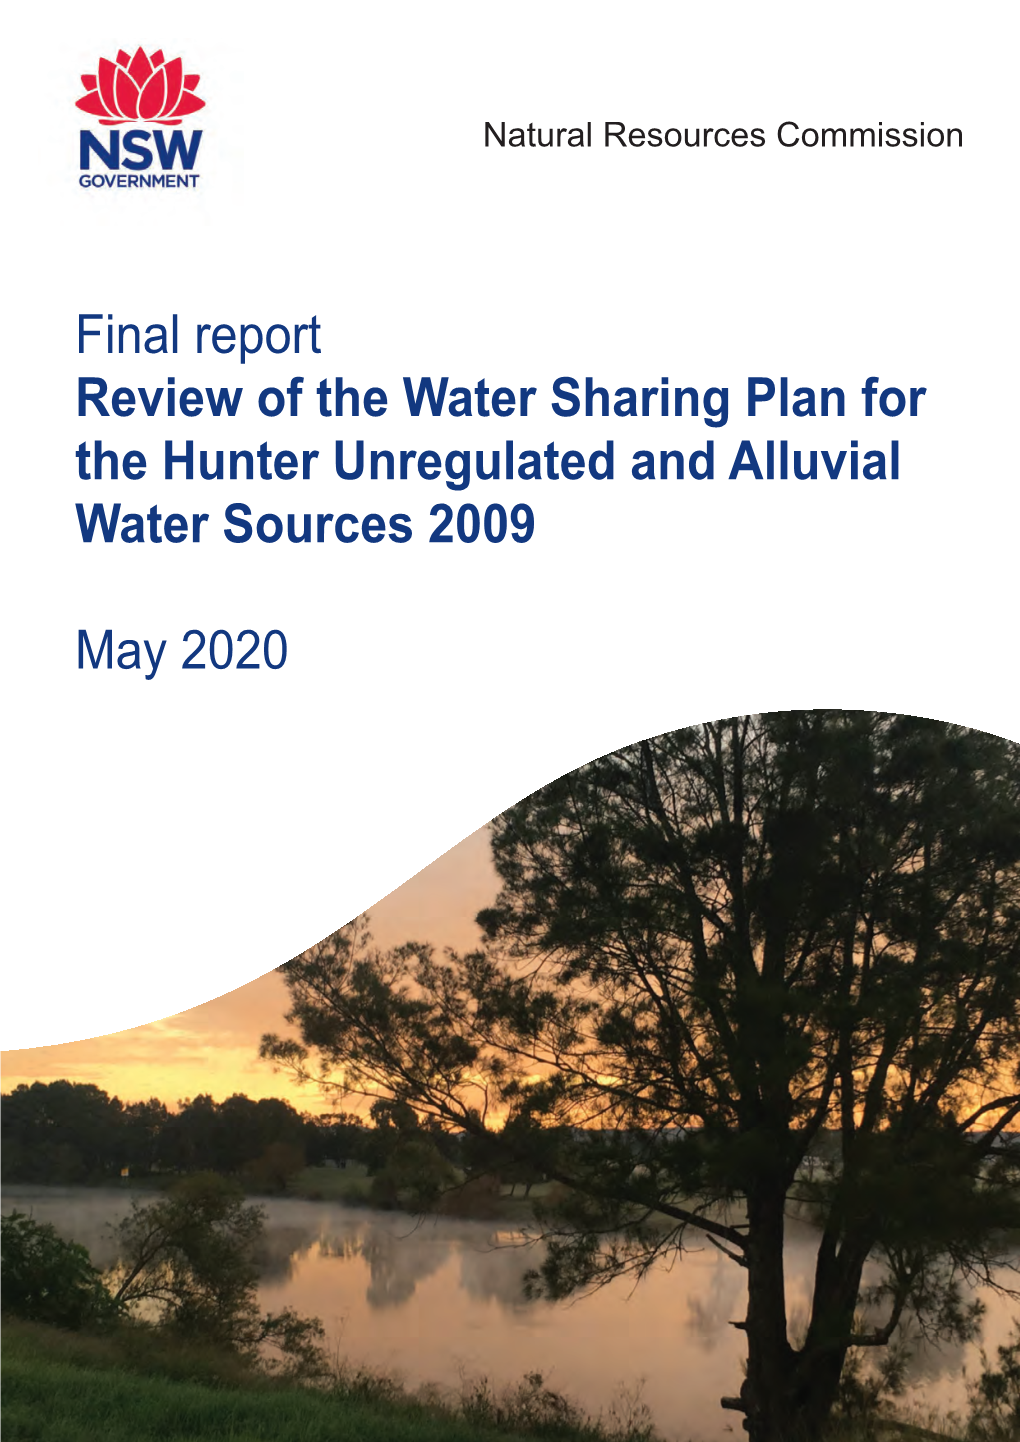 Final Report Review of the Water Sharing Plan for the Hunter Unregulated and Alluvial Water Sources 2009 May 2020